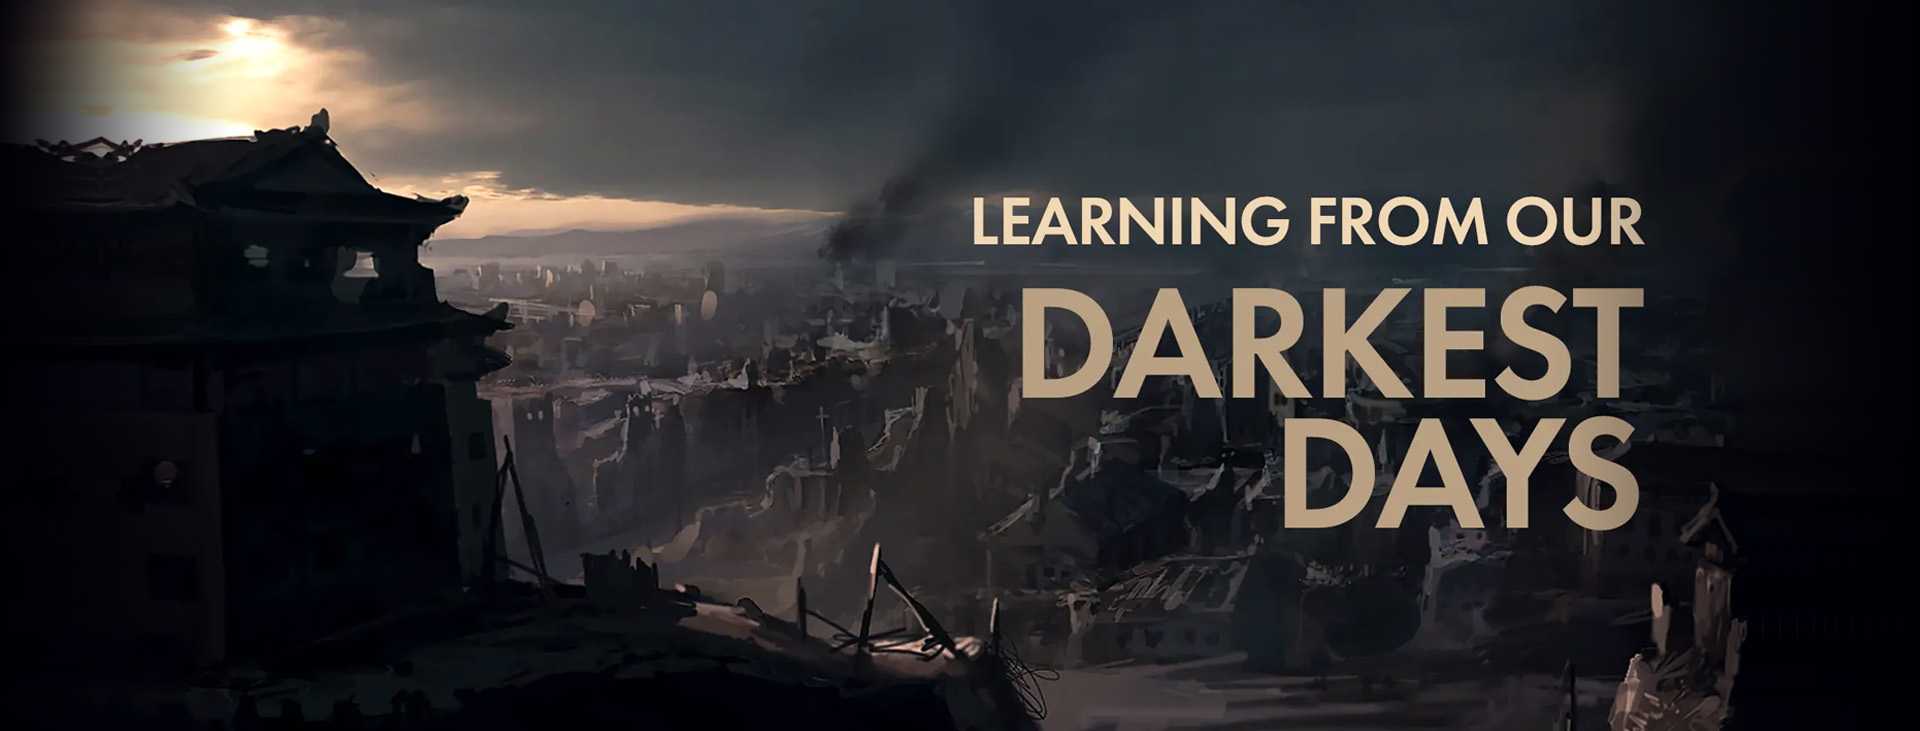 Learning From Our Darkest Days